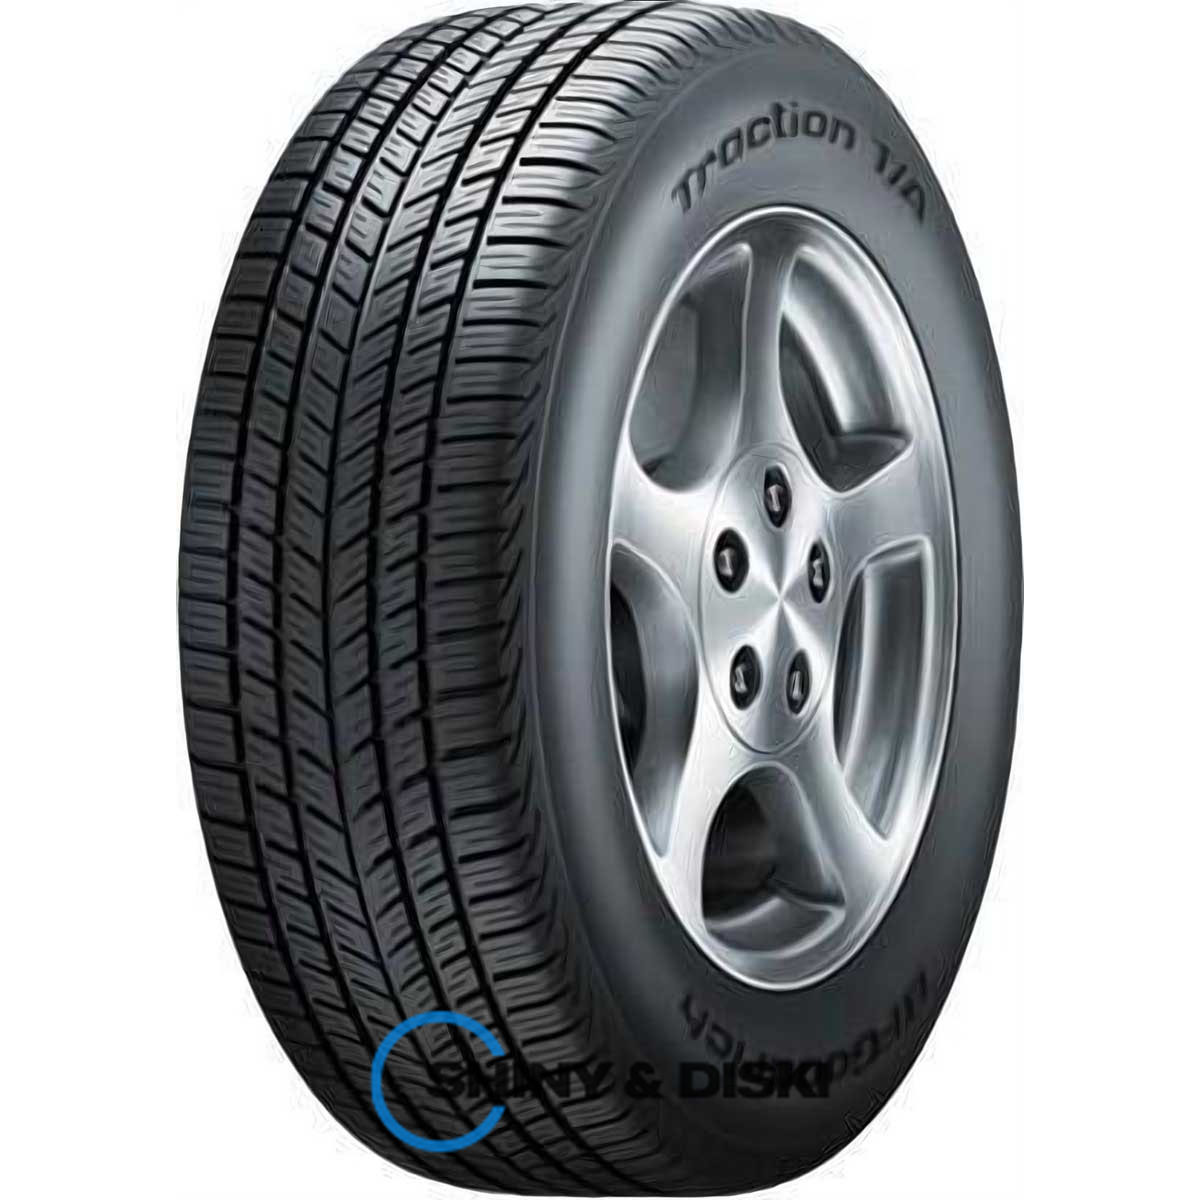 bfgoodrich traction t/a 205/60 r15 90t